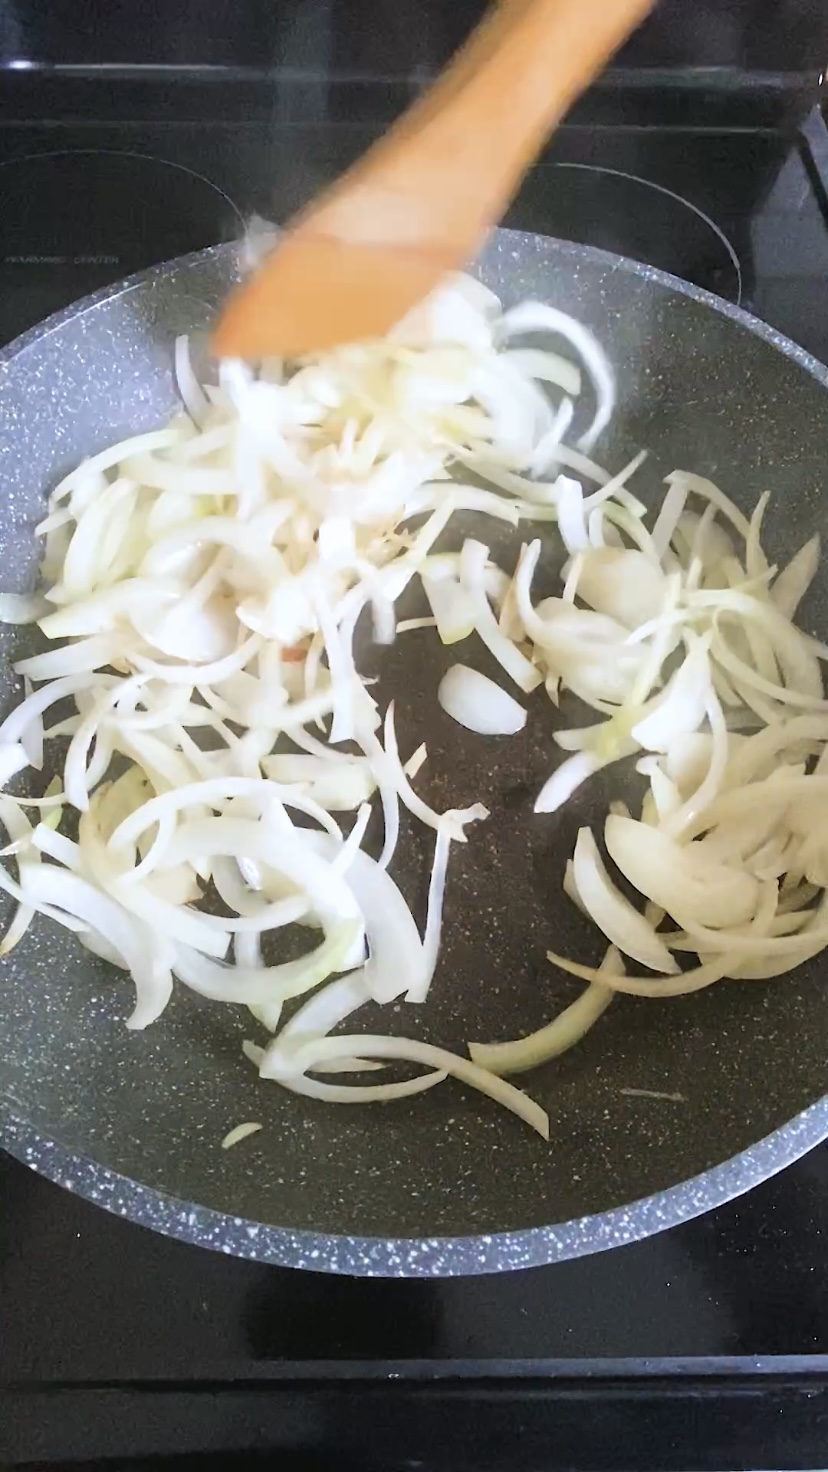 Onions are sauteed in a large skillet.